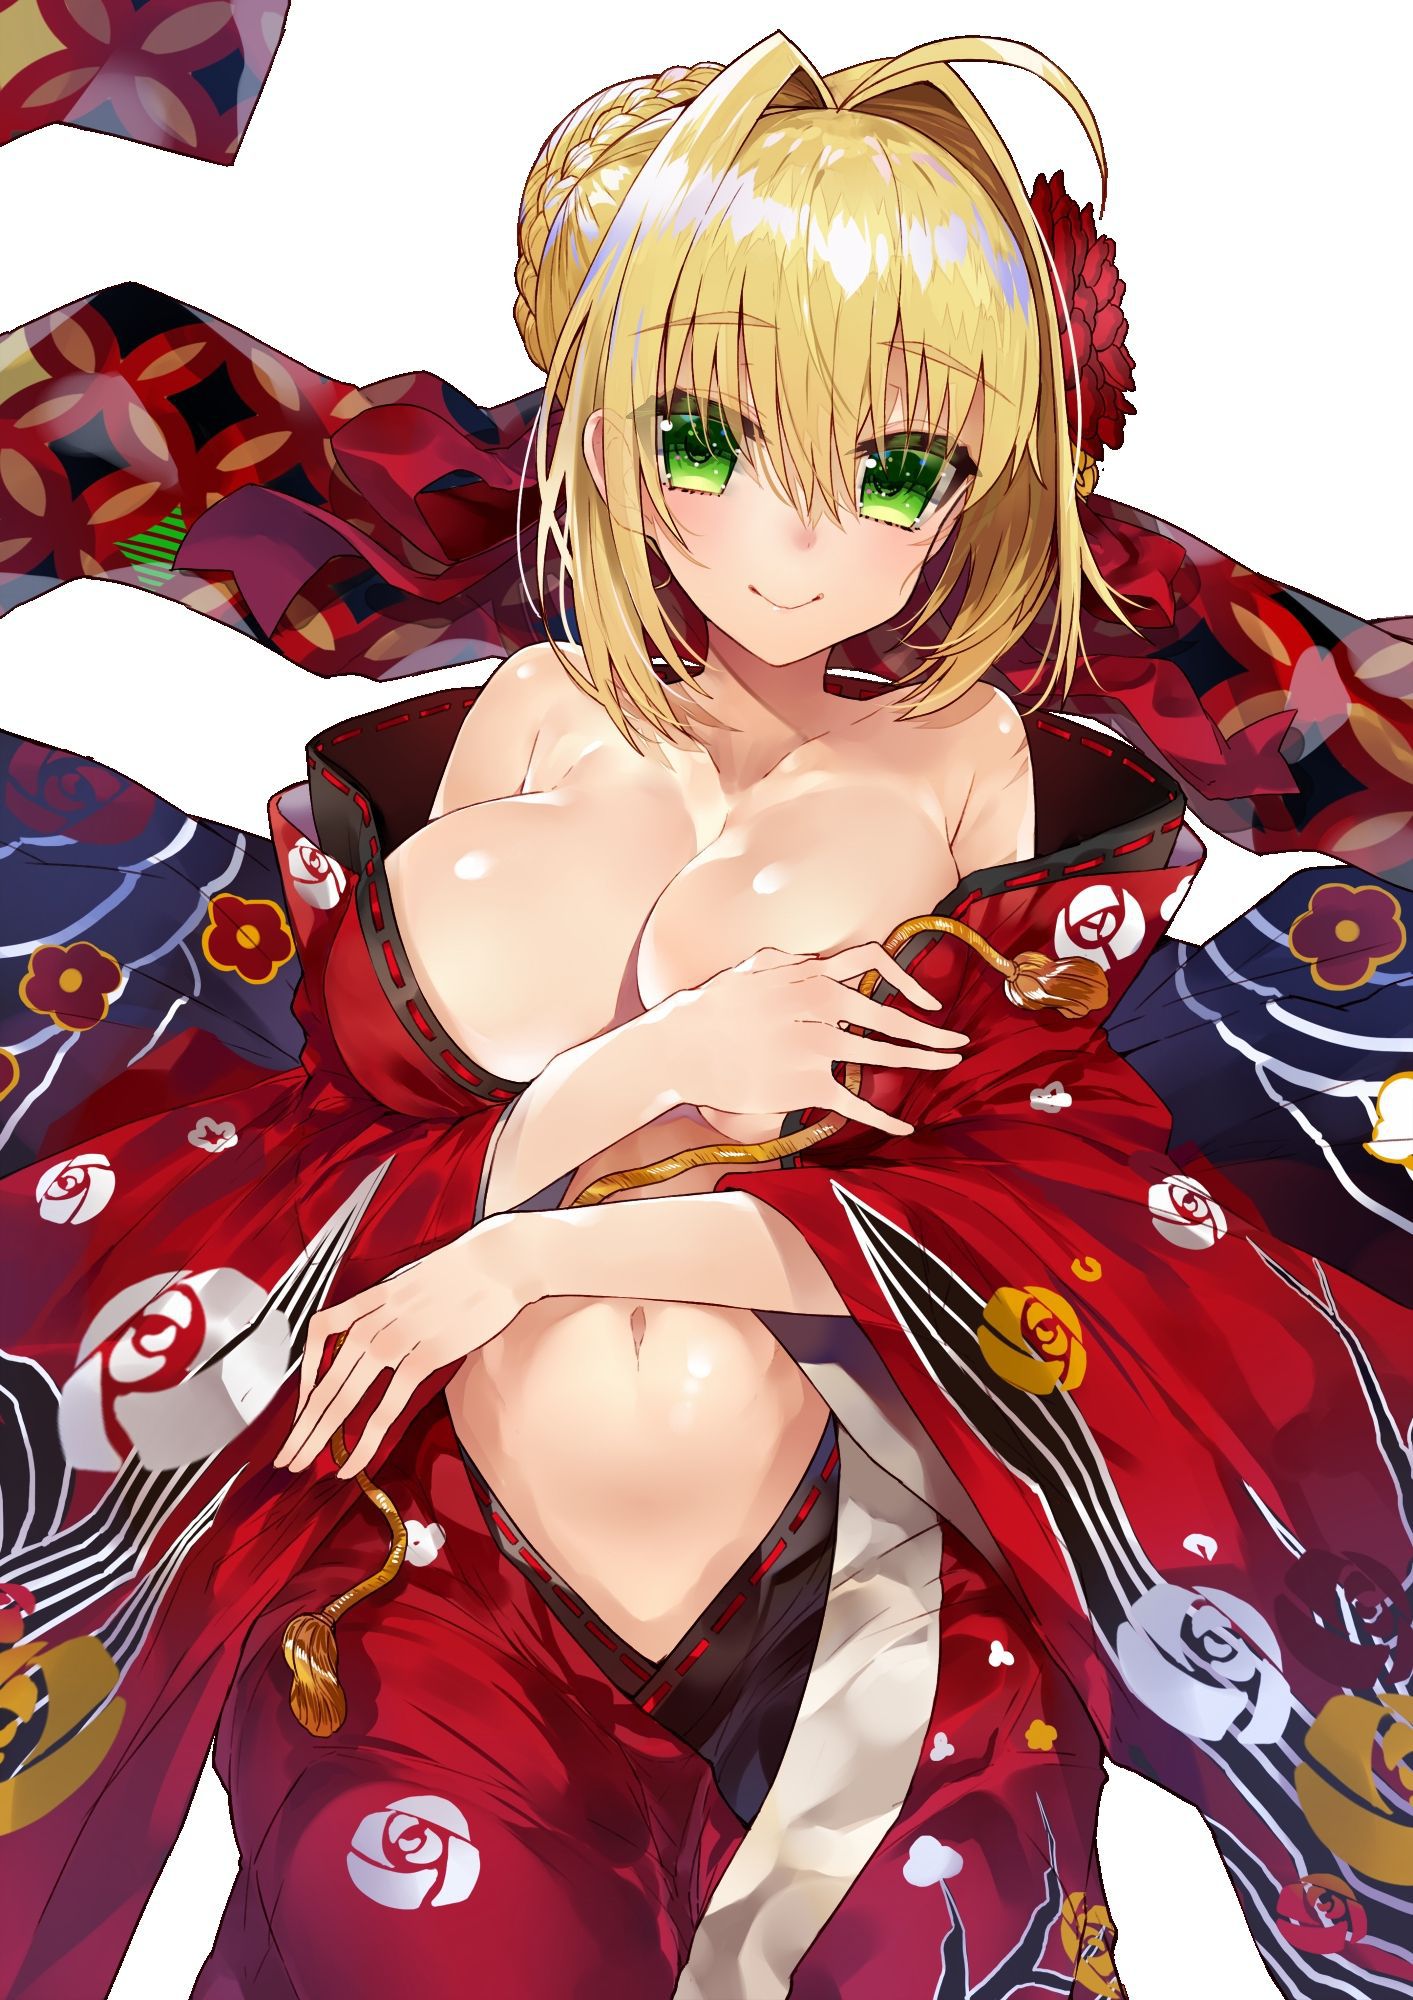 [Secondary ZIP] is about to start anime 100 pieces of cute image summary of Nero Claudius so soon 6